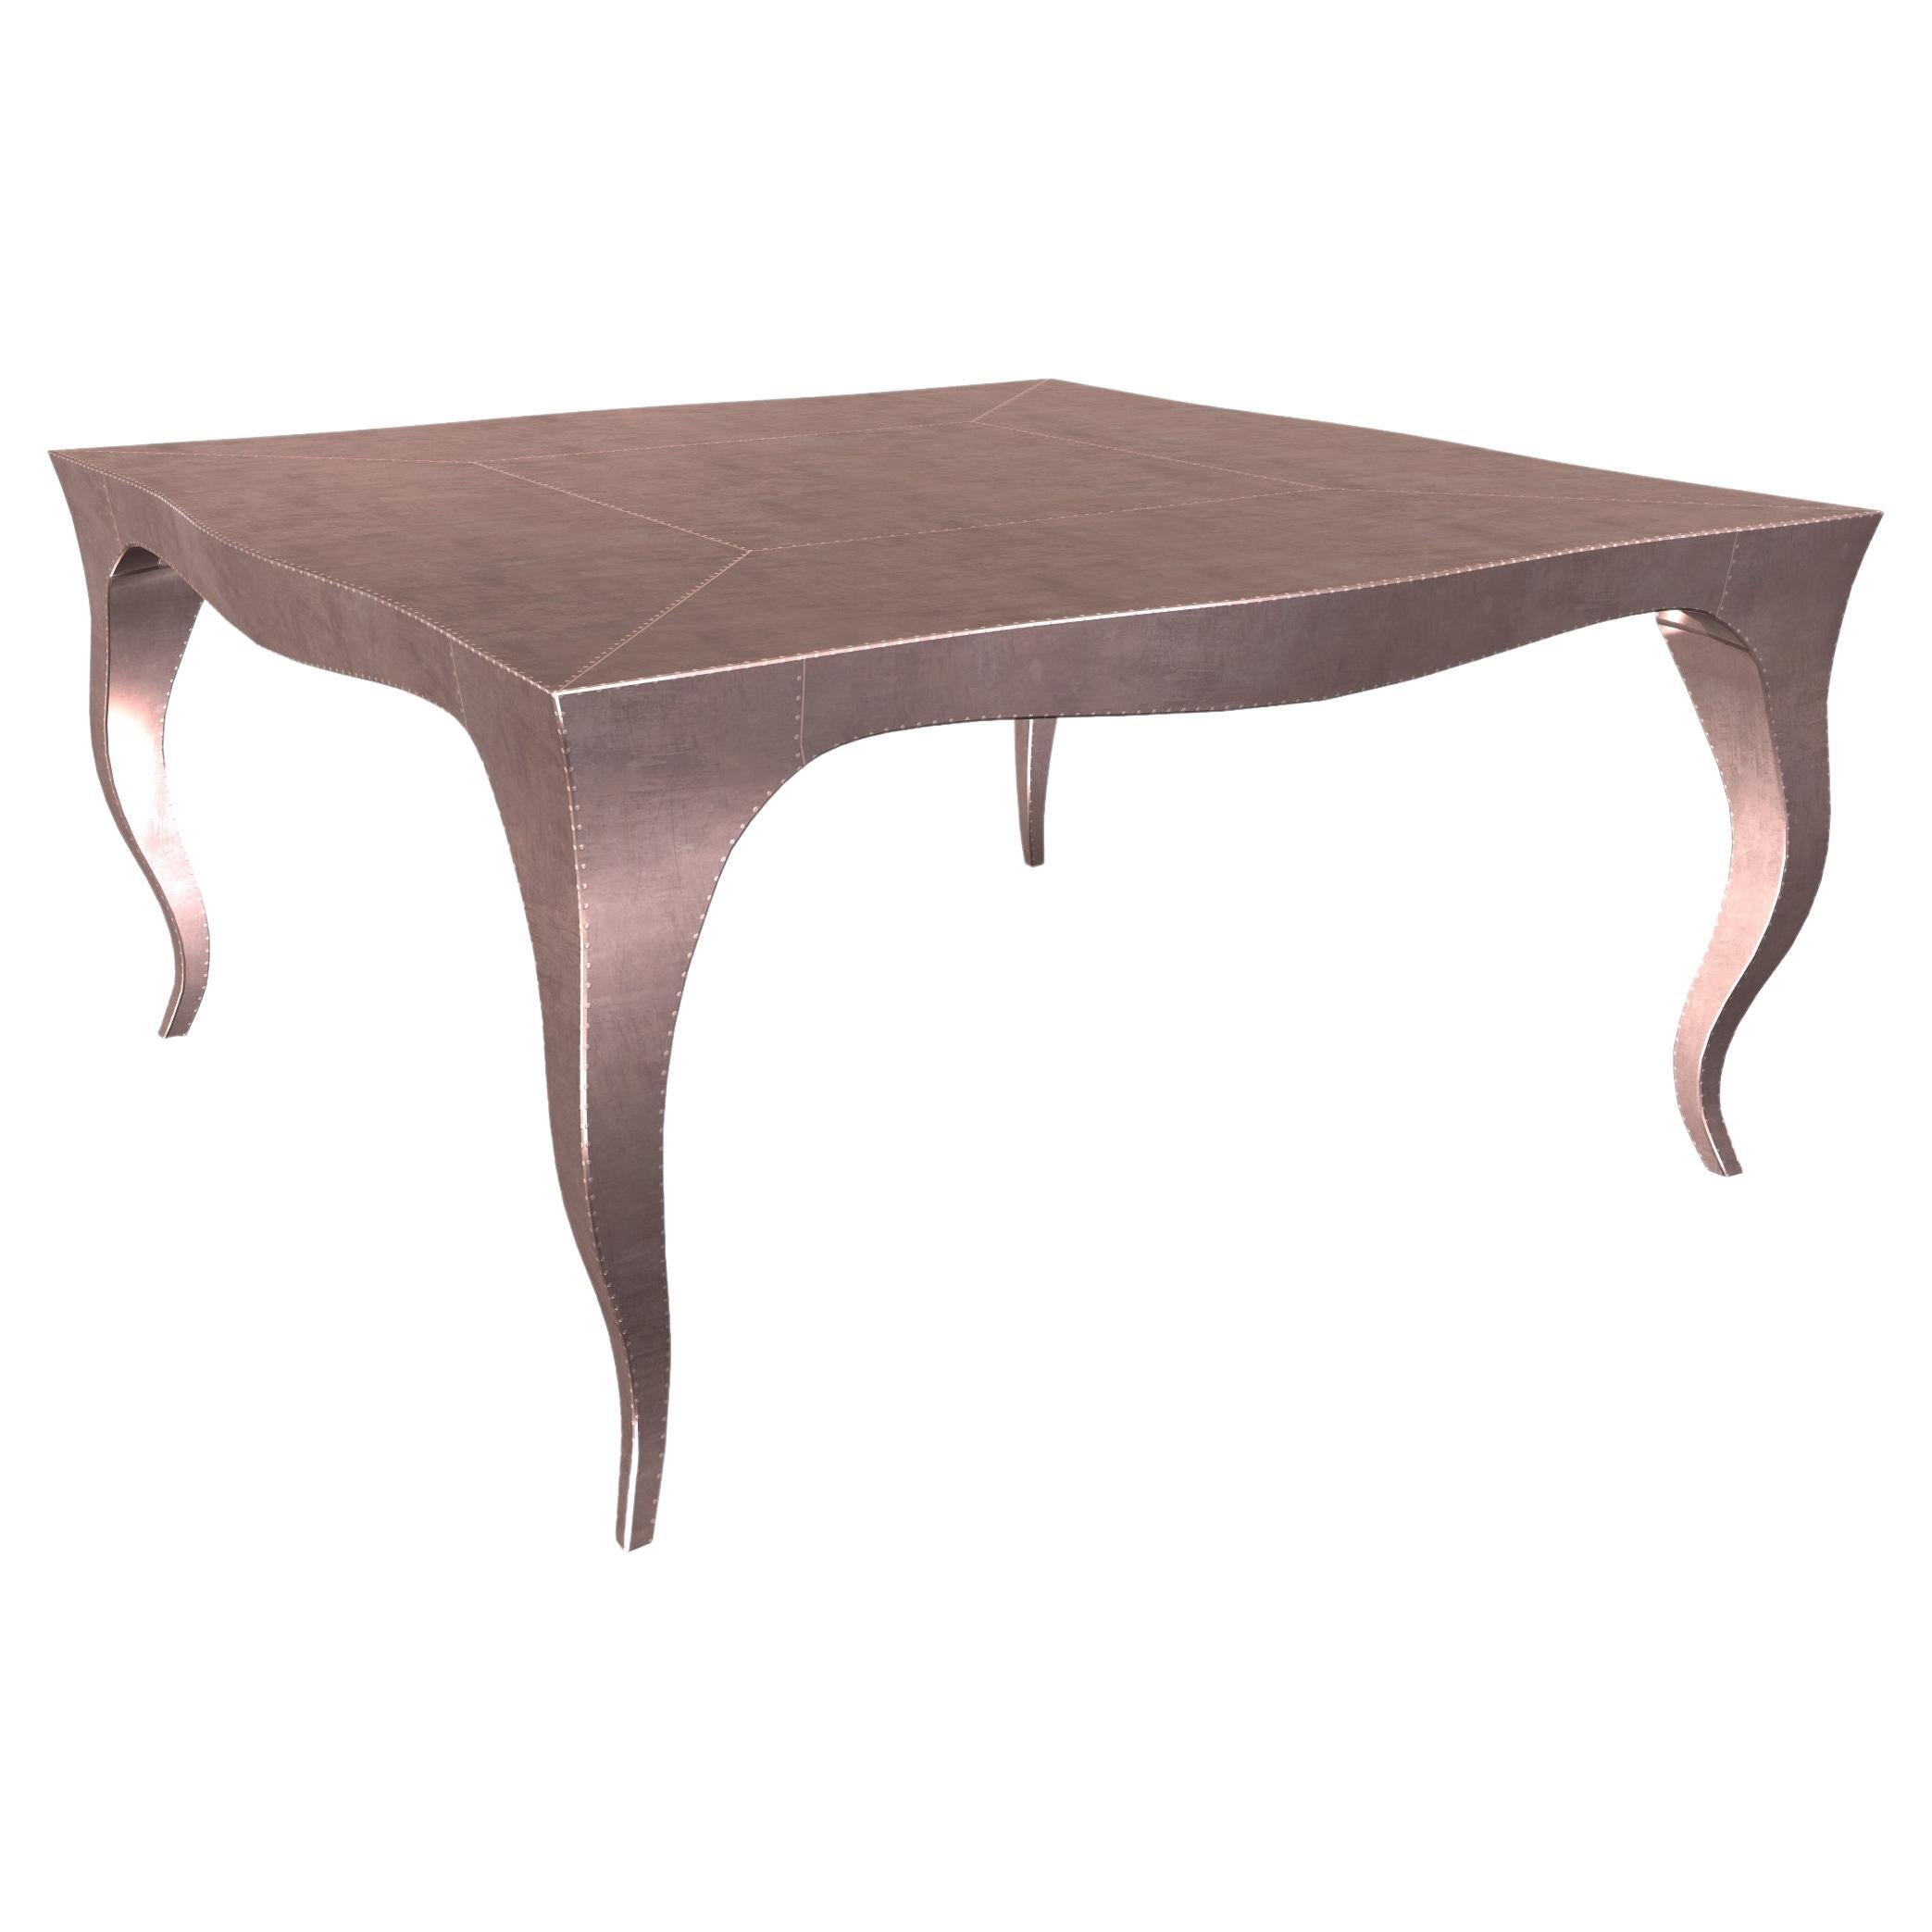 Louise Art Decor Nesting Tables Smooth Copper 18.5x18.5x10 inch by Paul M. For Sale